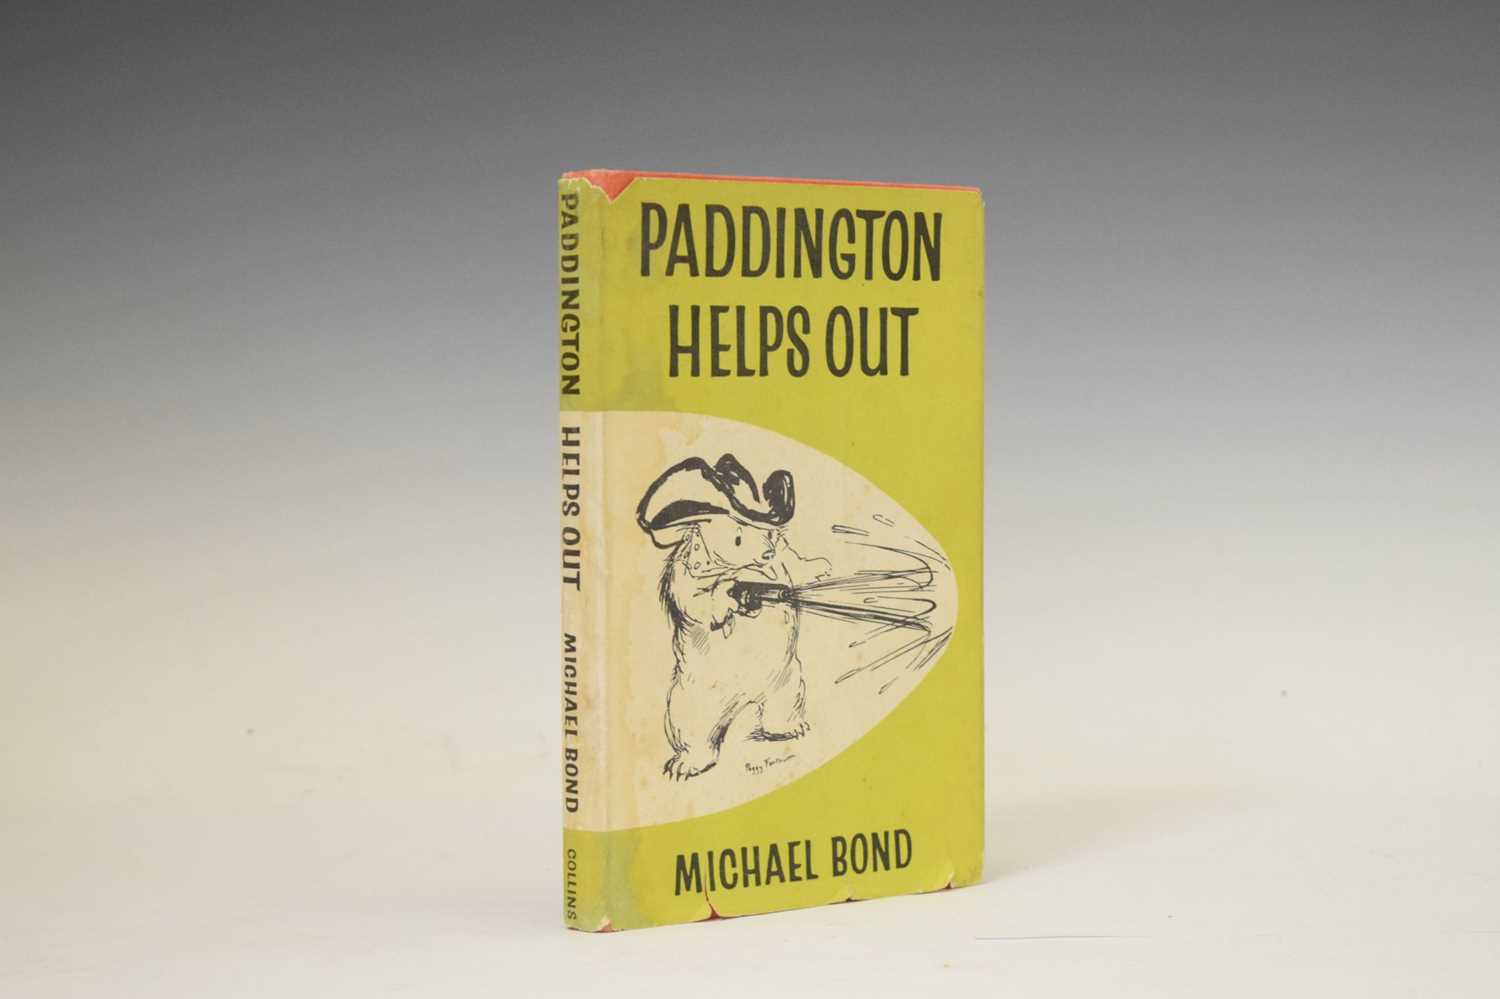 Bond, Michael - 'Paddington Helps Out' - First edition with dust wrapper 1960 - Image 7 of 7